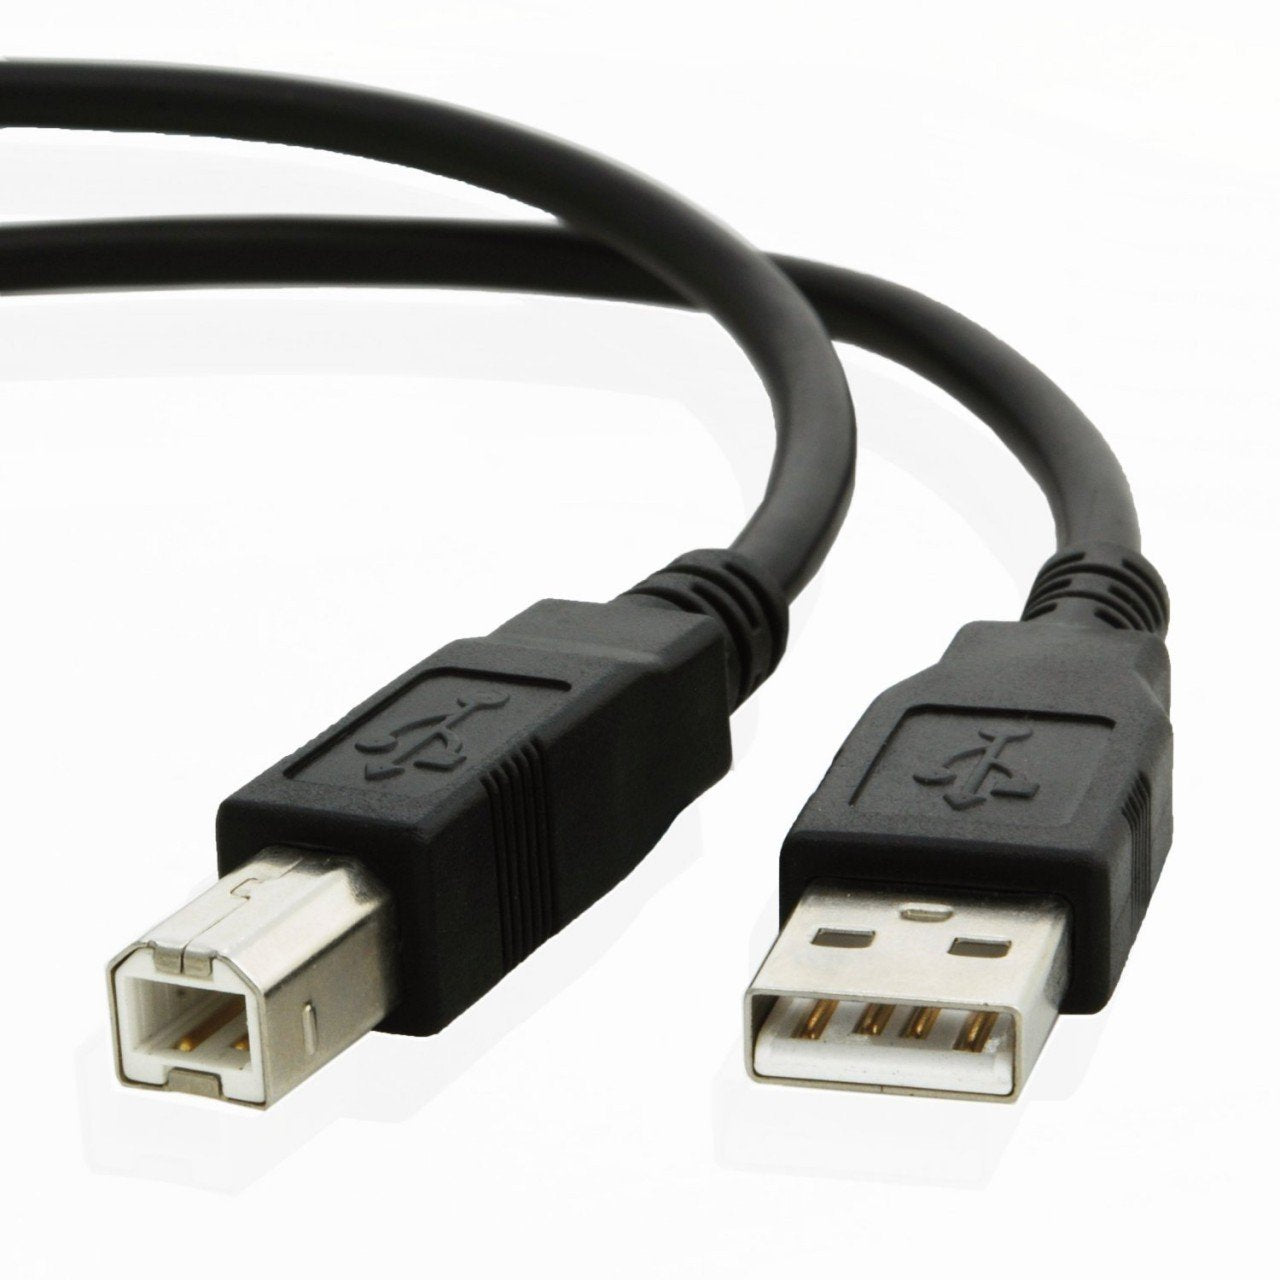 USB cable for Brother MFC-J5930DW